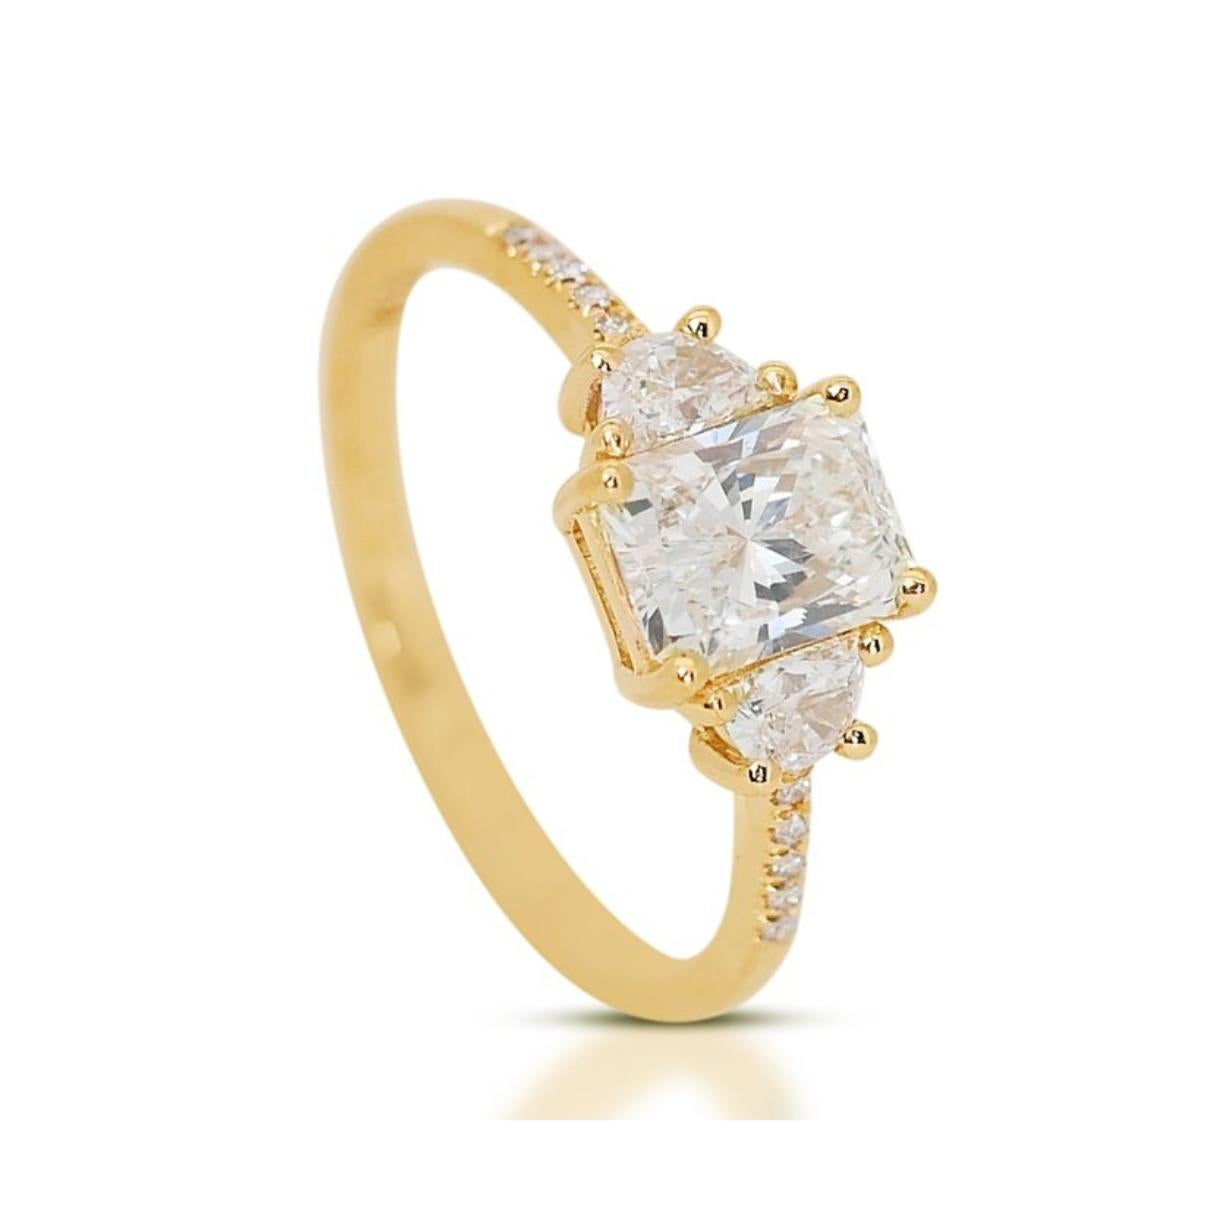 Ideal cut Radiant 3 stones ring with half moons made from 18k Yellow Gold Diamond Pave Ring w/1.36 ct - IGI Certified

Featuring a meticulously crafted 18k yellow gold diamond pave ring that epitomizes luxury and sophistication. The heart of this